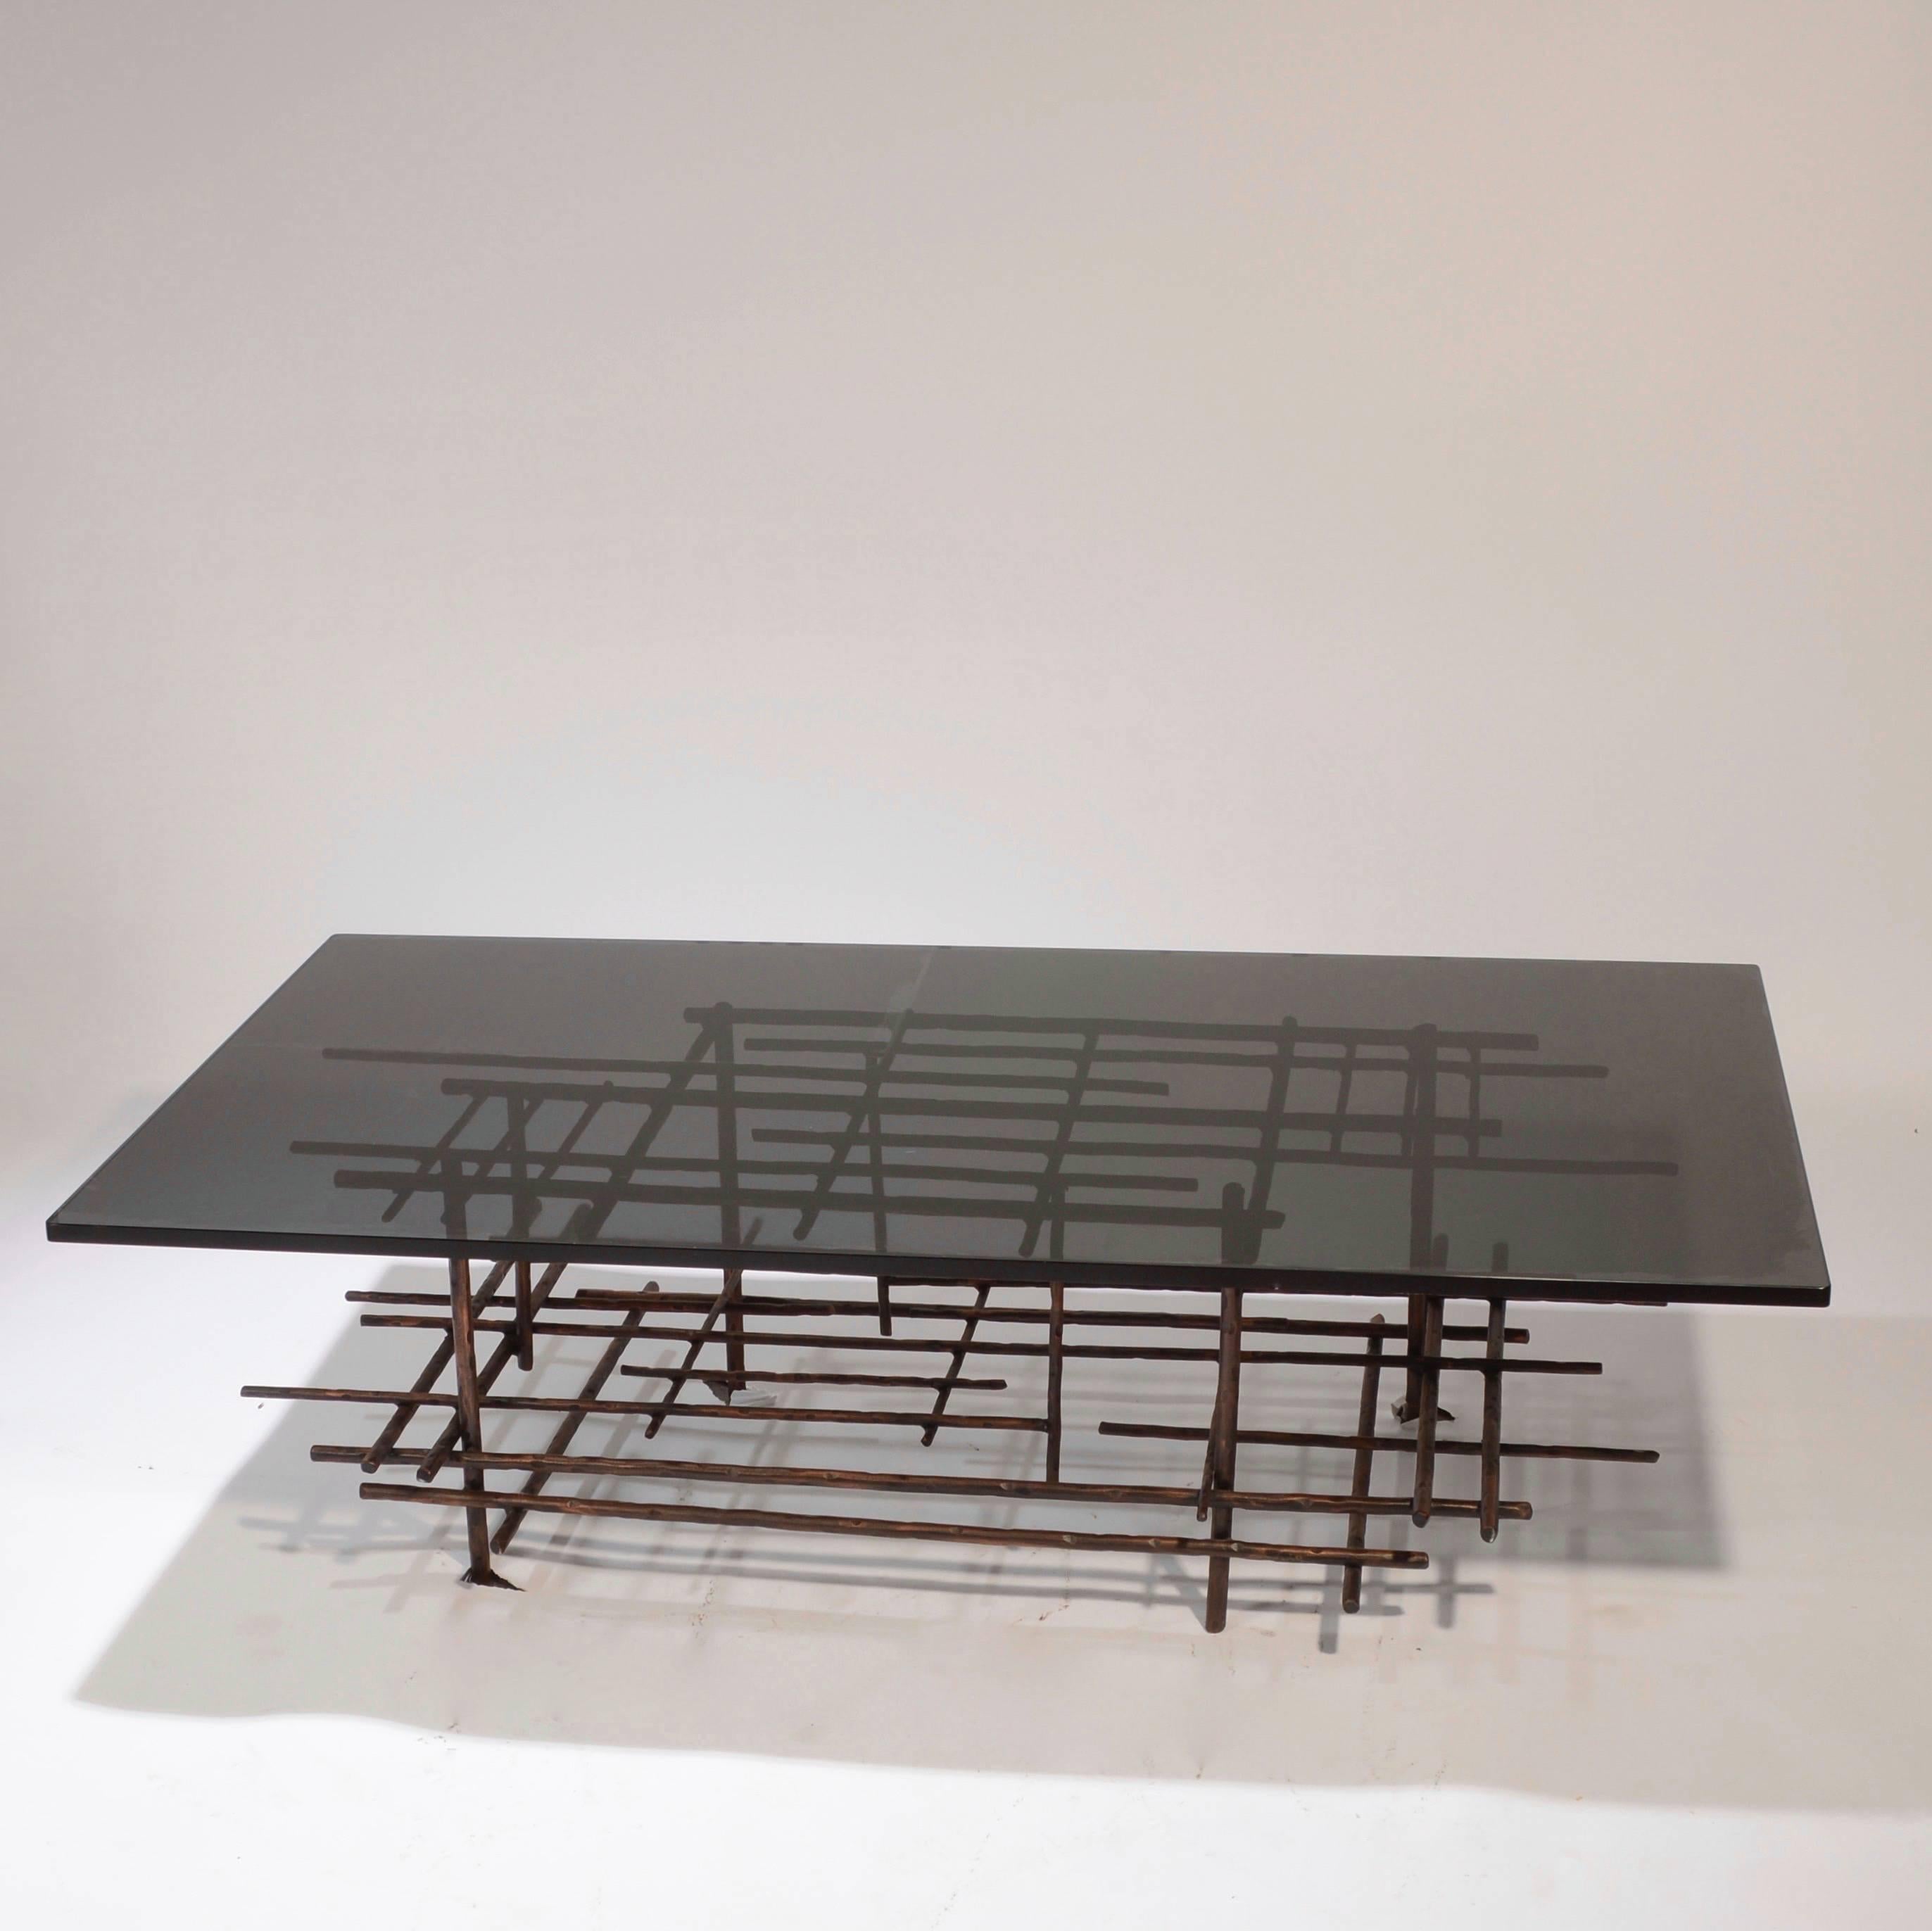 This is an amazing modern sculpture coffee table made from solid steel and thick, smoked glass.